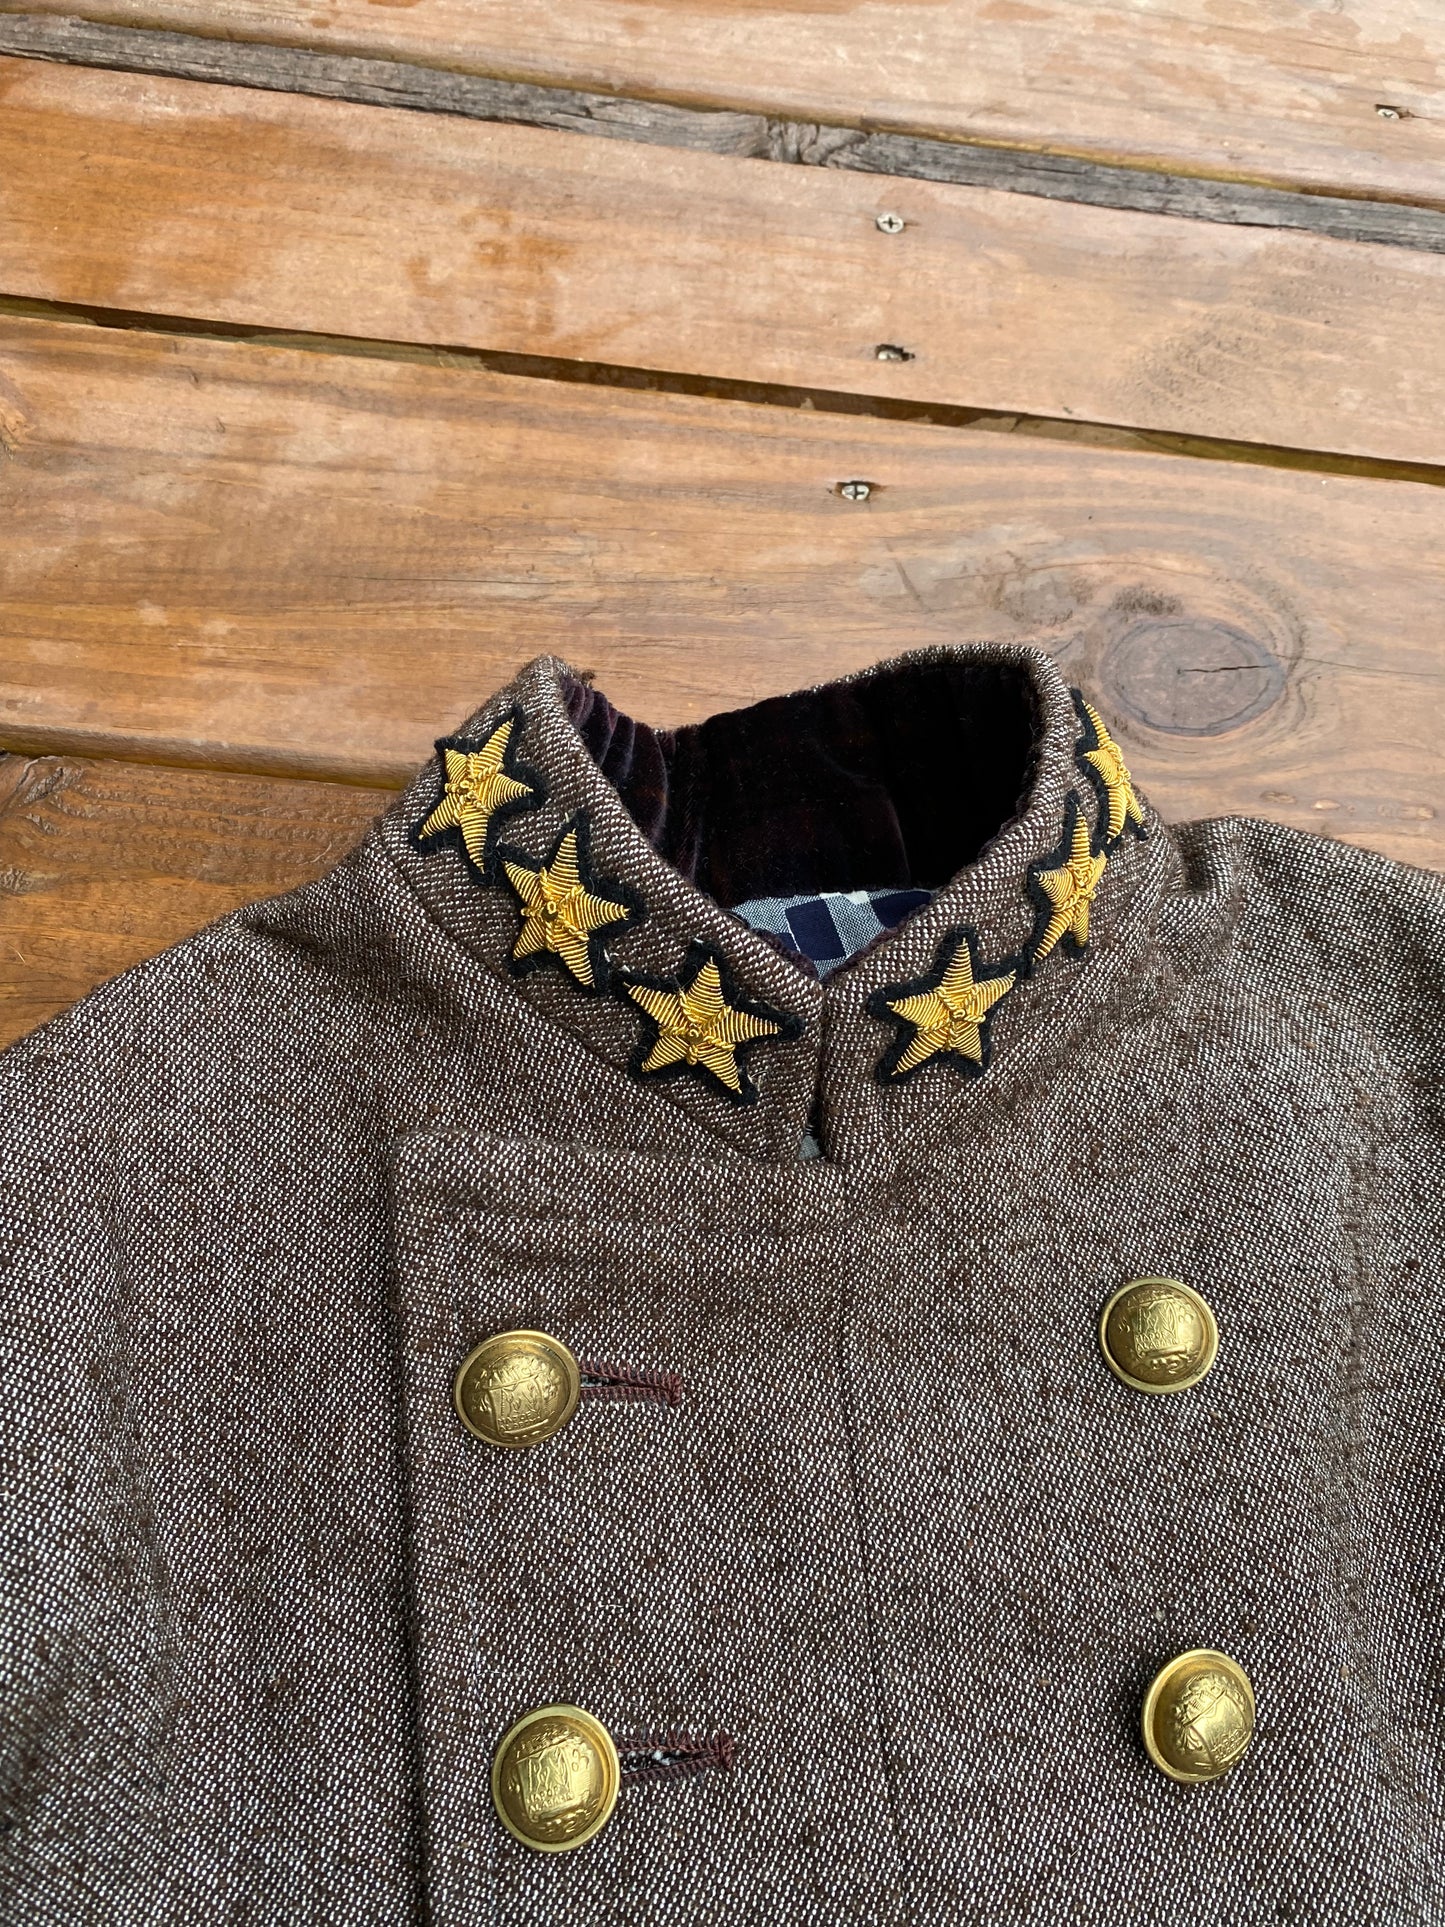 Confederate Officer Frock Coat "Deep South" Jean